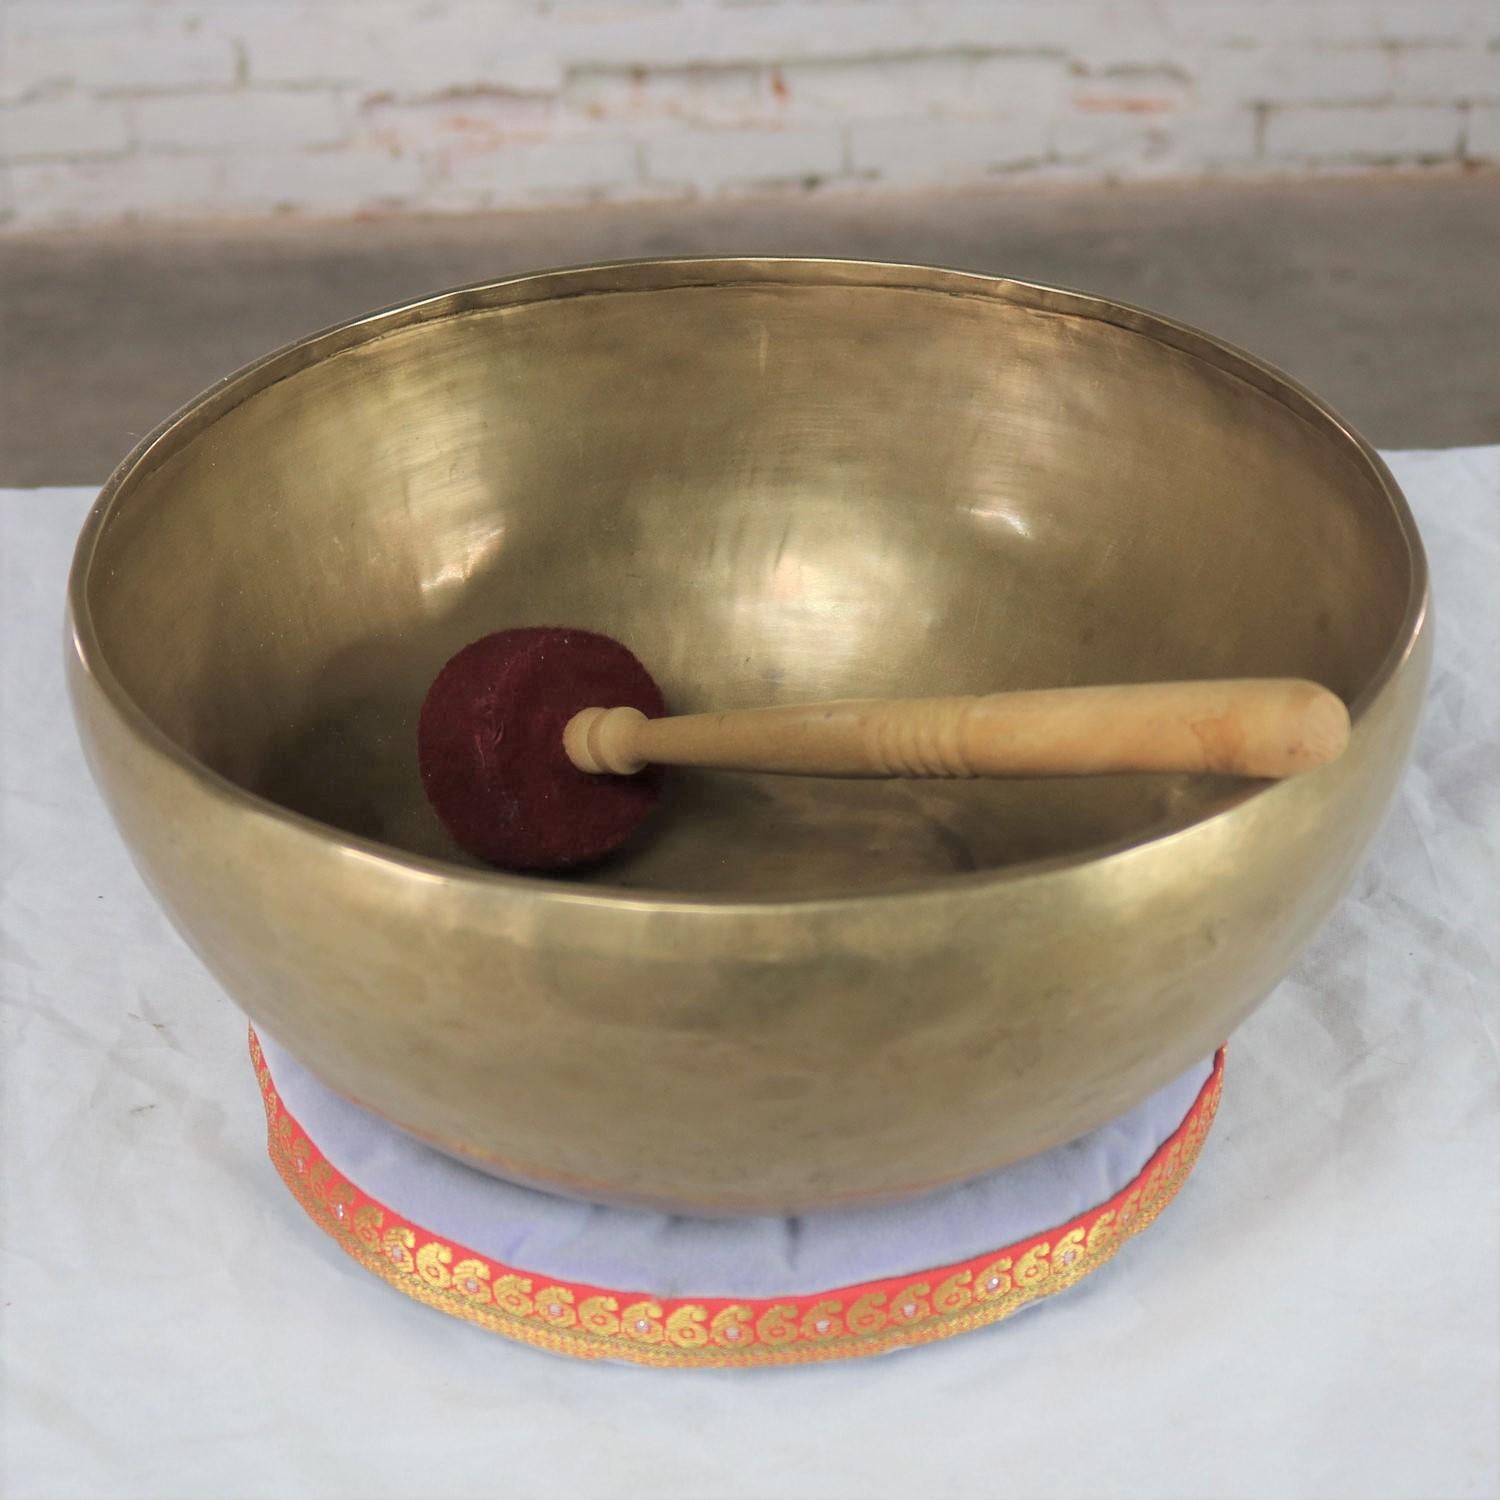 Beautiful singing bowl or standing bowl with a mallet and its playing pillow. Handmade of bronze or bell metal and showing the makers hand. It is in wonderful vintage condition with awesome patina. Please see photos, circa 20th century.

This is